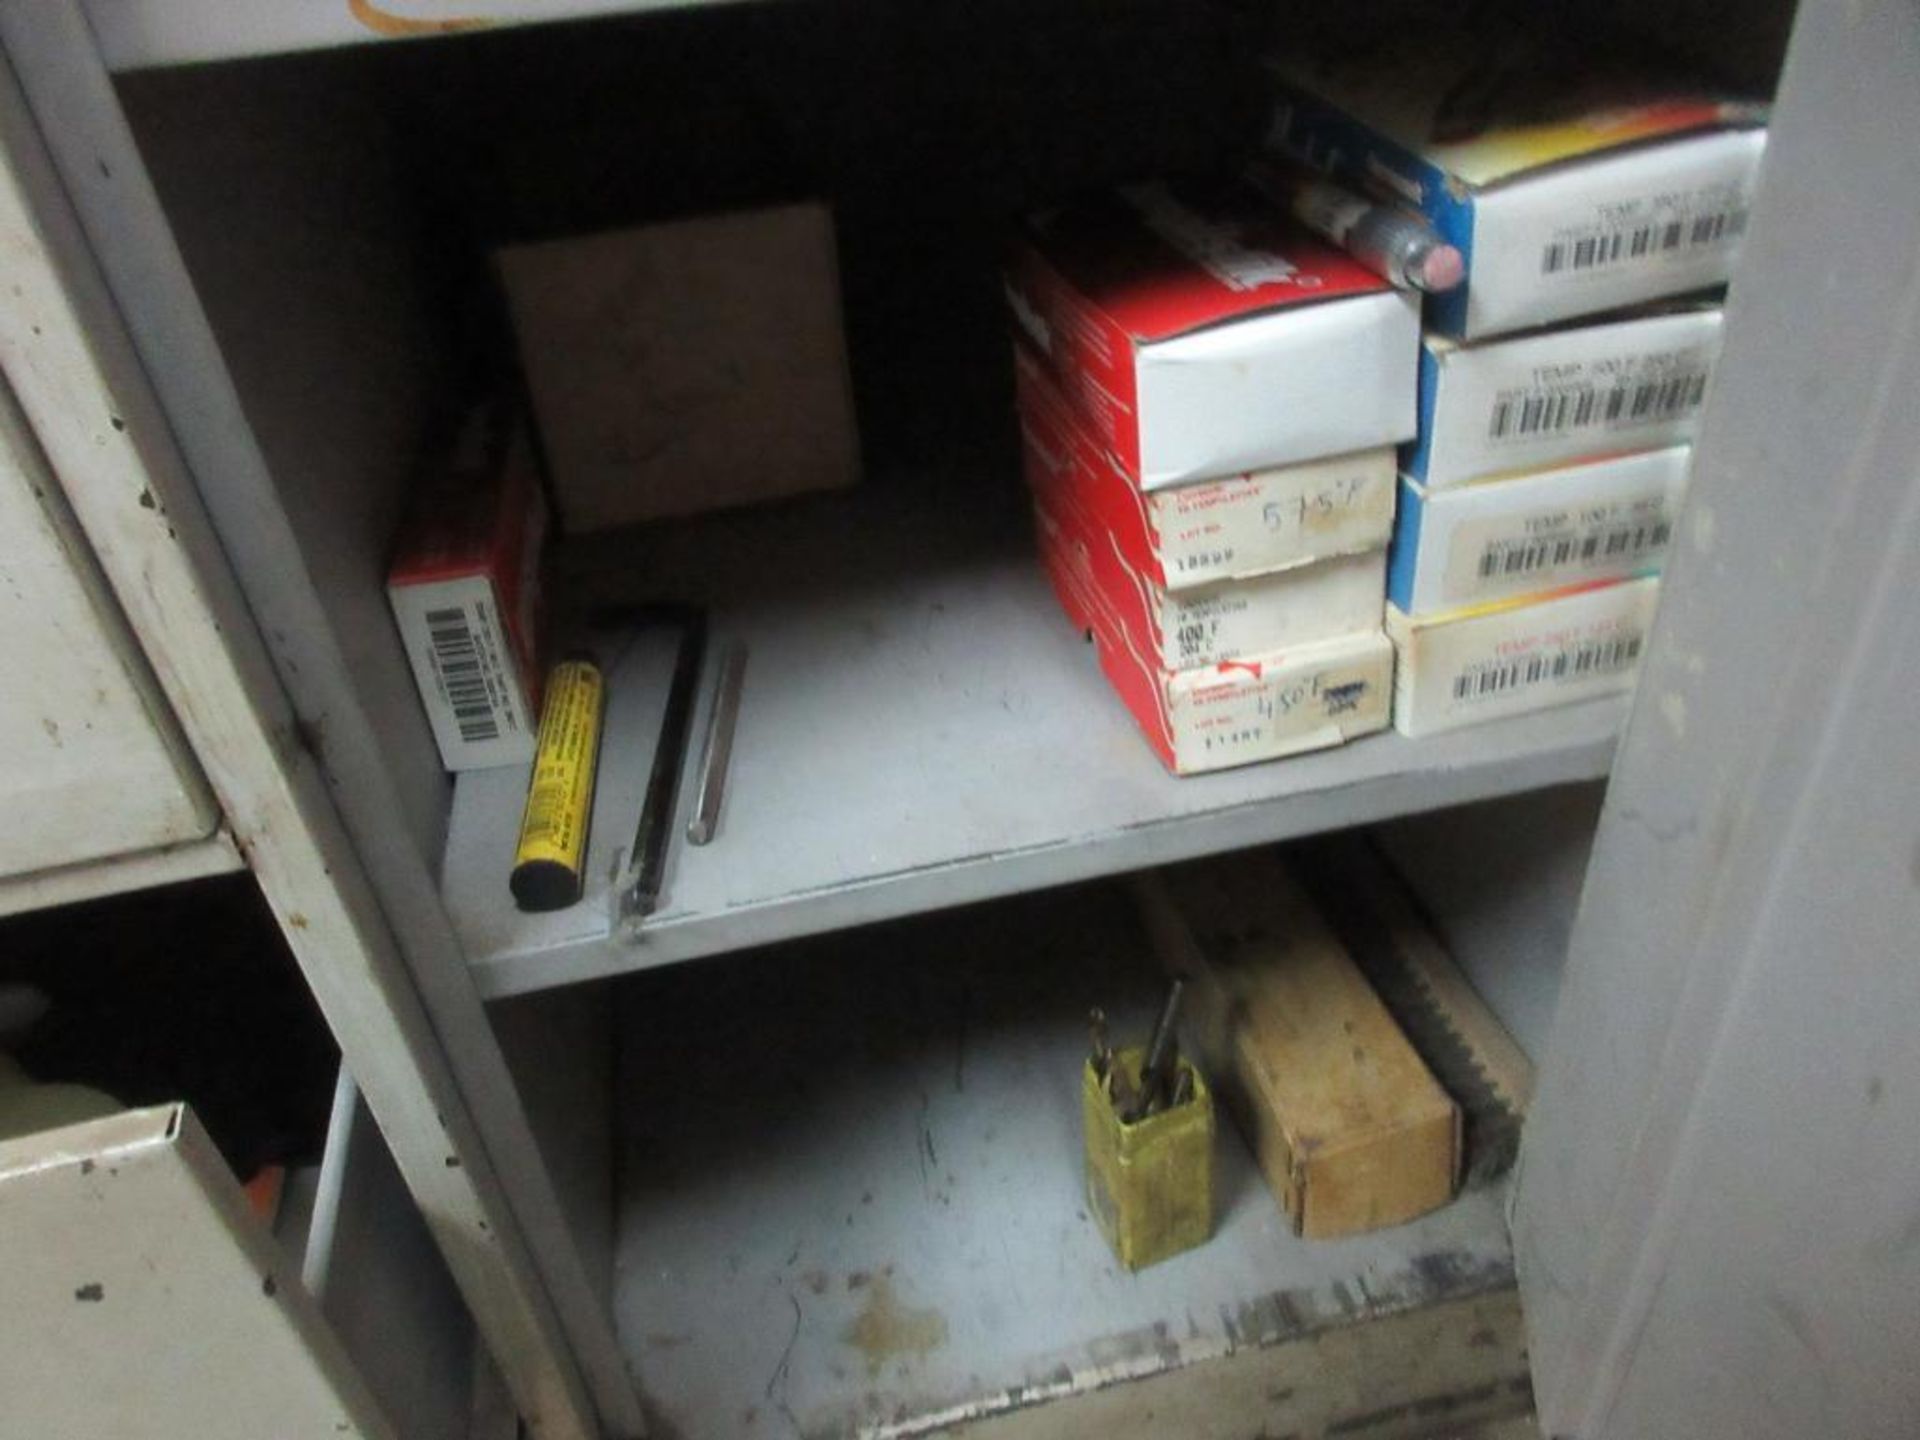 CONTENTS OF 3 CABINETS IN WORK AREA, TEST AND MEASUREMENT EQUIPMENT, METERS, TOOLS, ETC (OFFICES) - Image 18 of 18